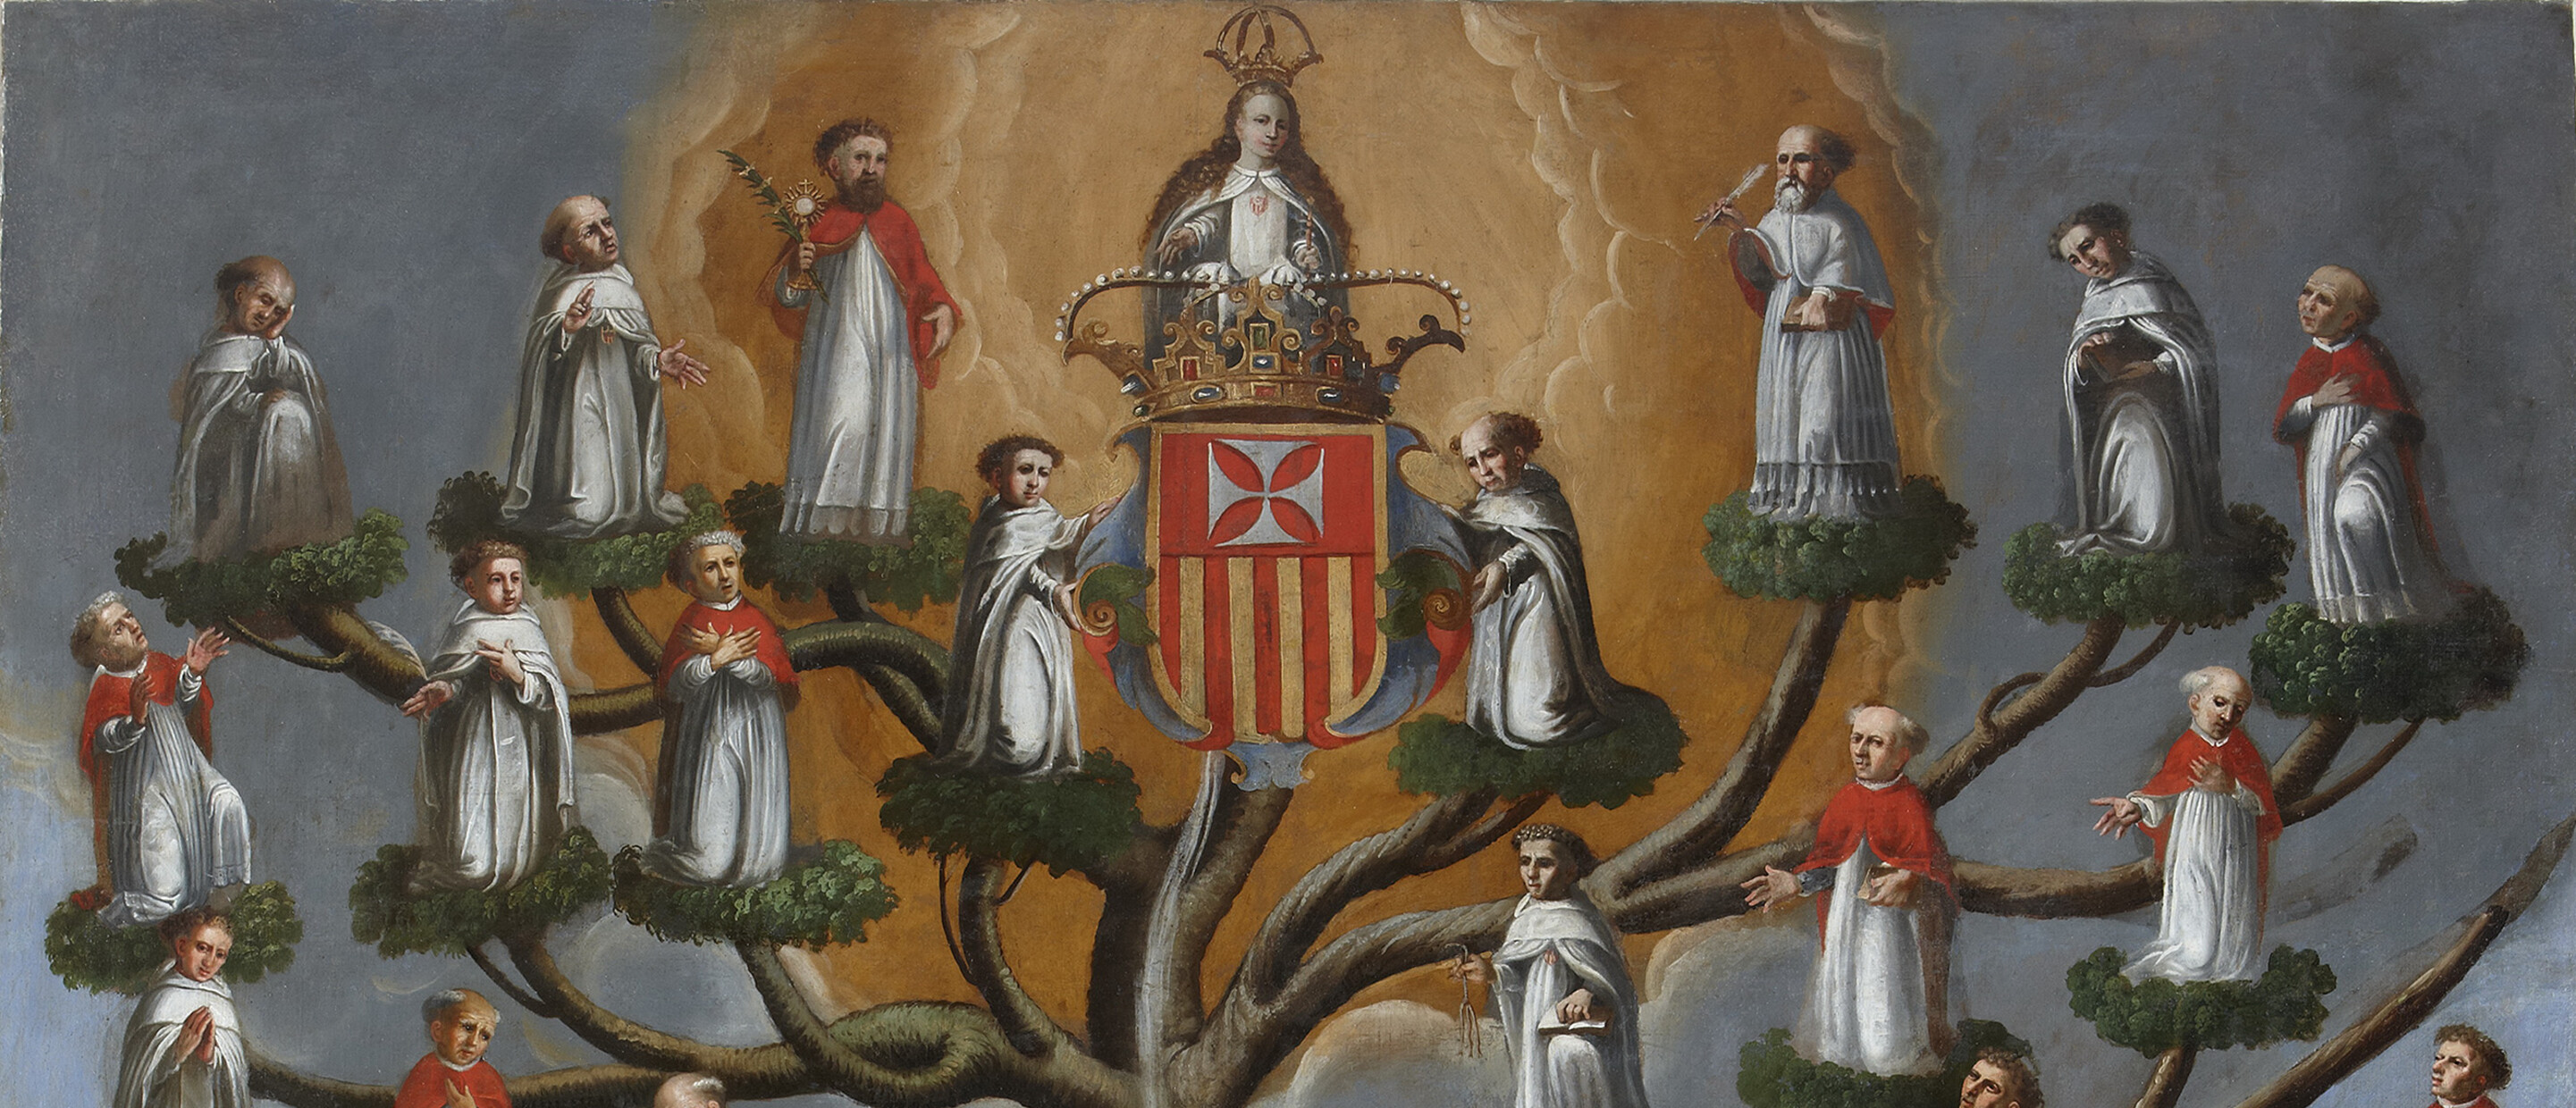 tree with people in robes on each branch. tree sits on man lying down in white robe